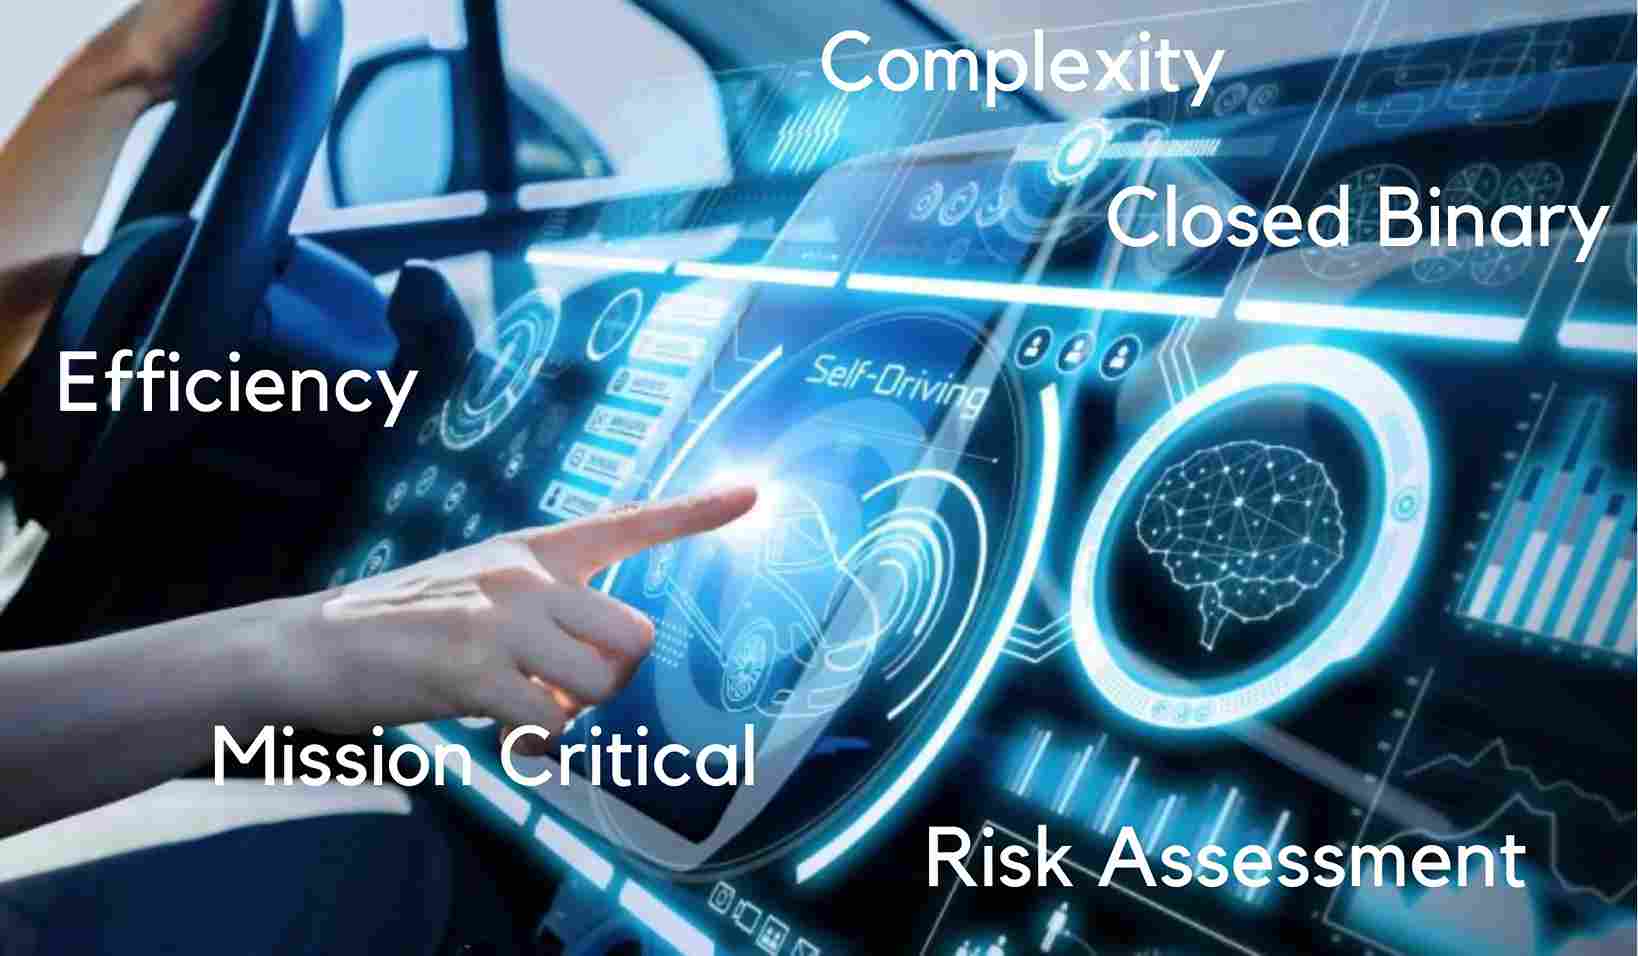 Autonomous Risk: What Can We Learn From the Complexity of Vehicle Code